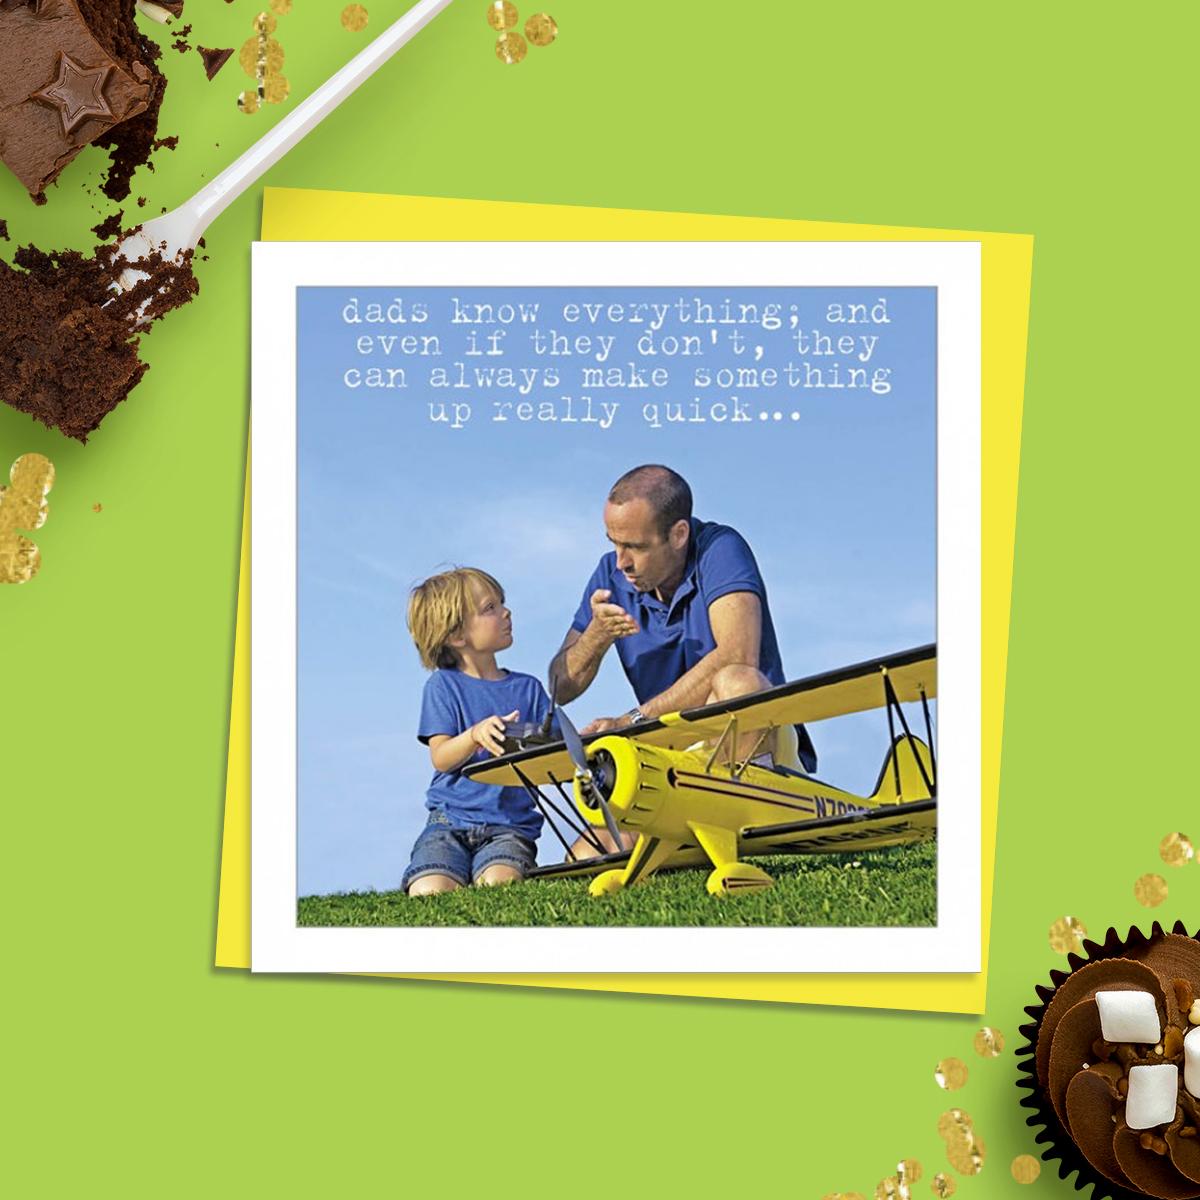 Beautiful Photographic Funny Card Showing A Man And A Young Boy Chatting By A Large Remote Control Aeroplane. Caption: Dads Know Everything; And Even If They Don't, They Can Always Make Somwething Up